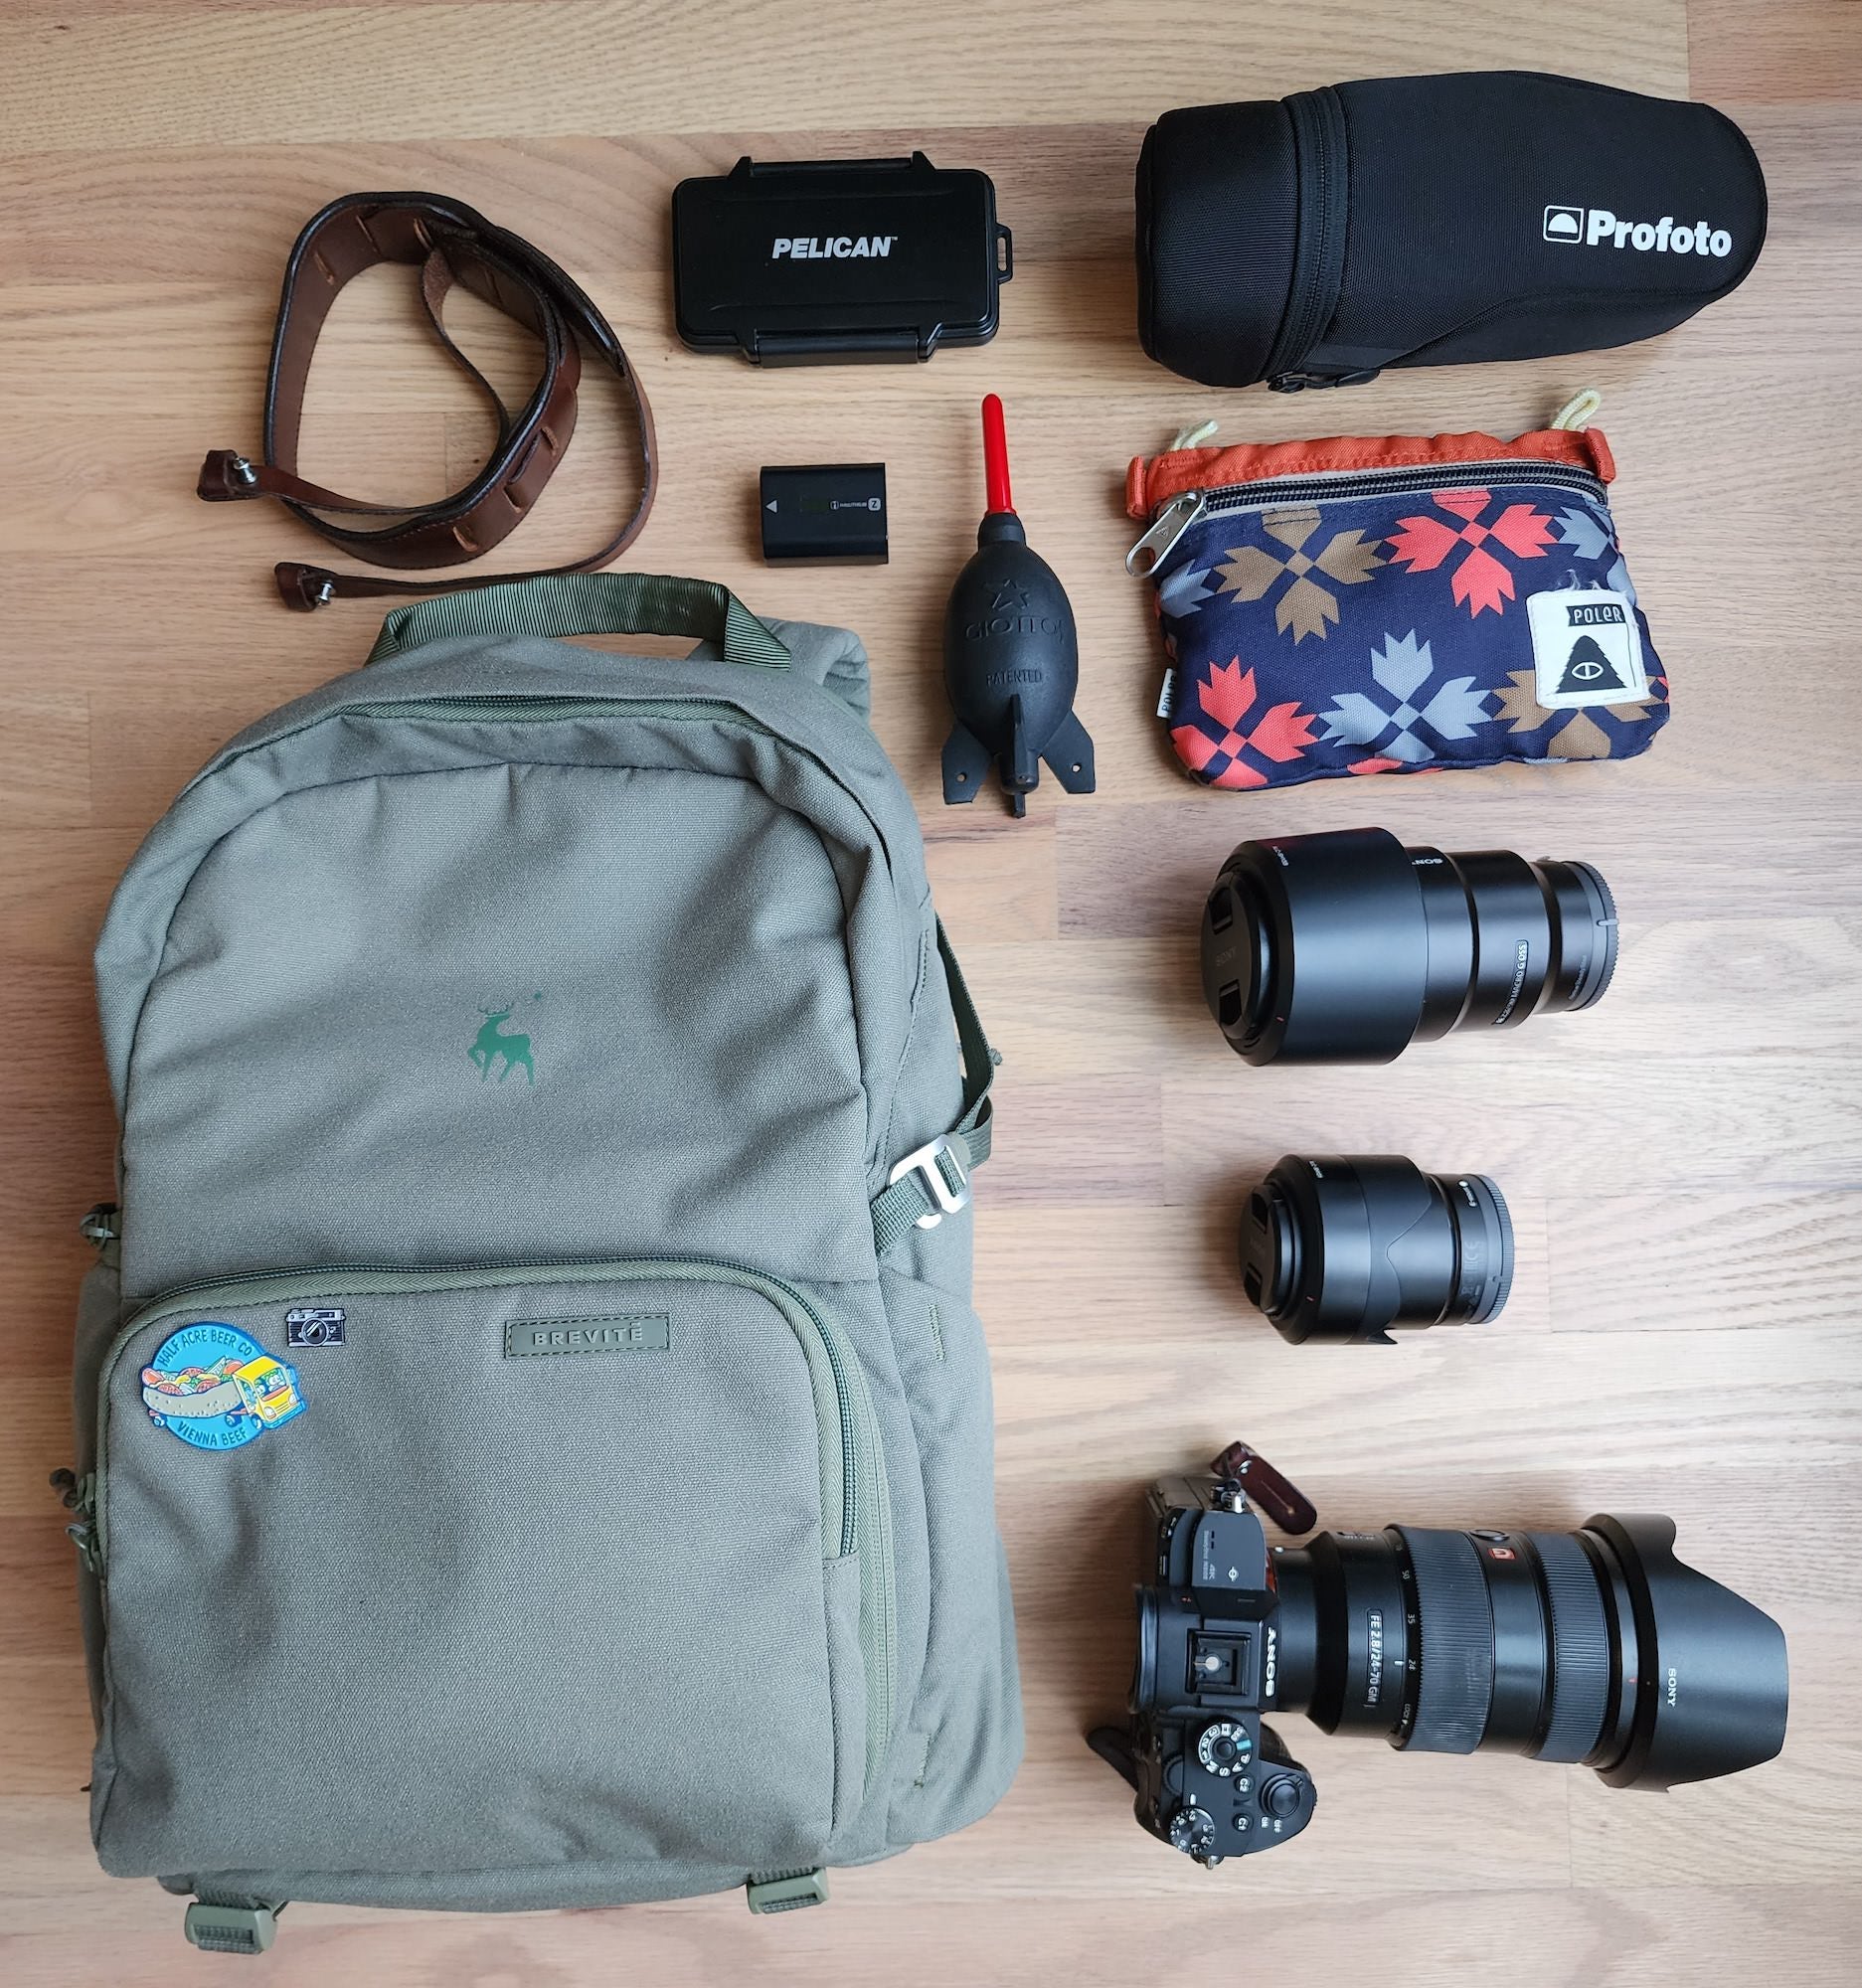 Kristen Mendiola's kit for food and travel photos and videos